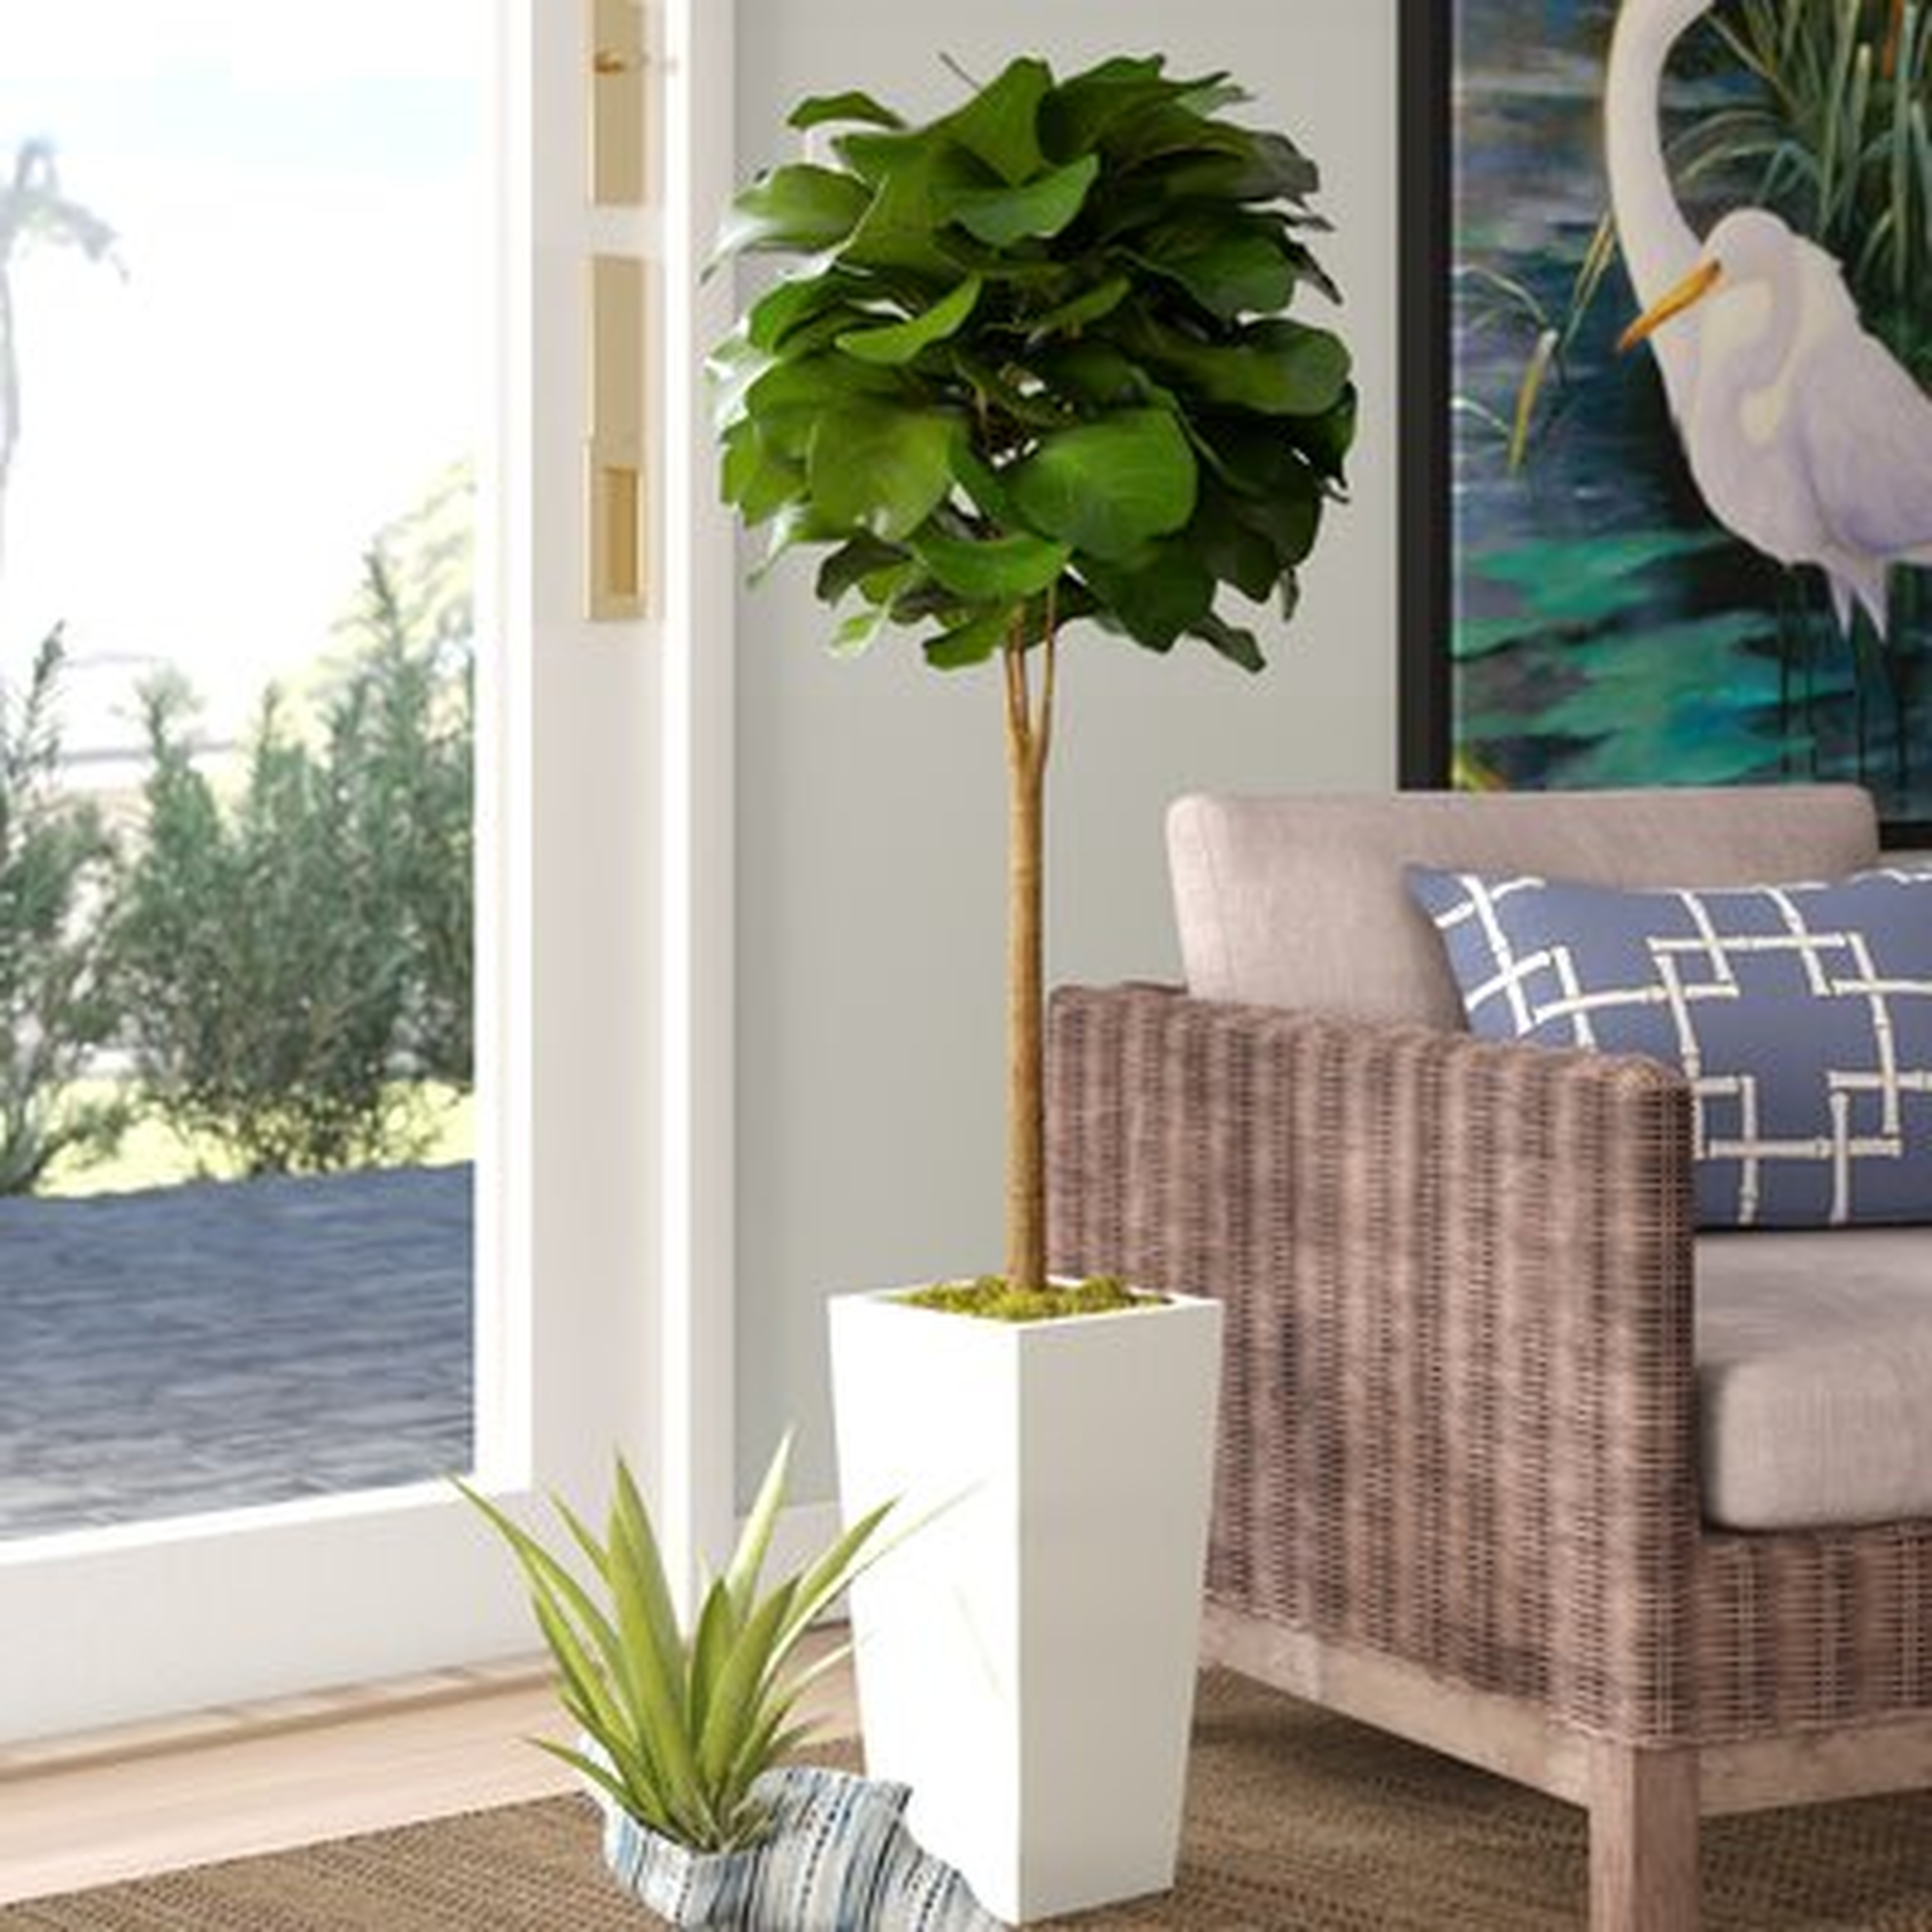 4' Fiddle Leaf Boxwood Topiary in Tower Planter - Wayfair